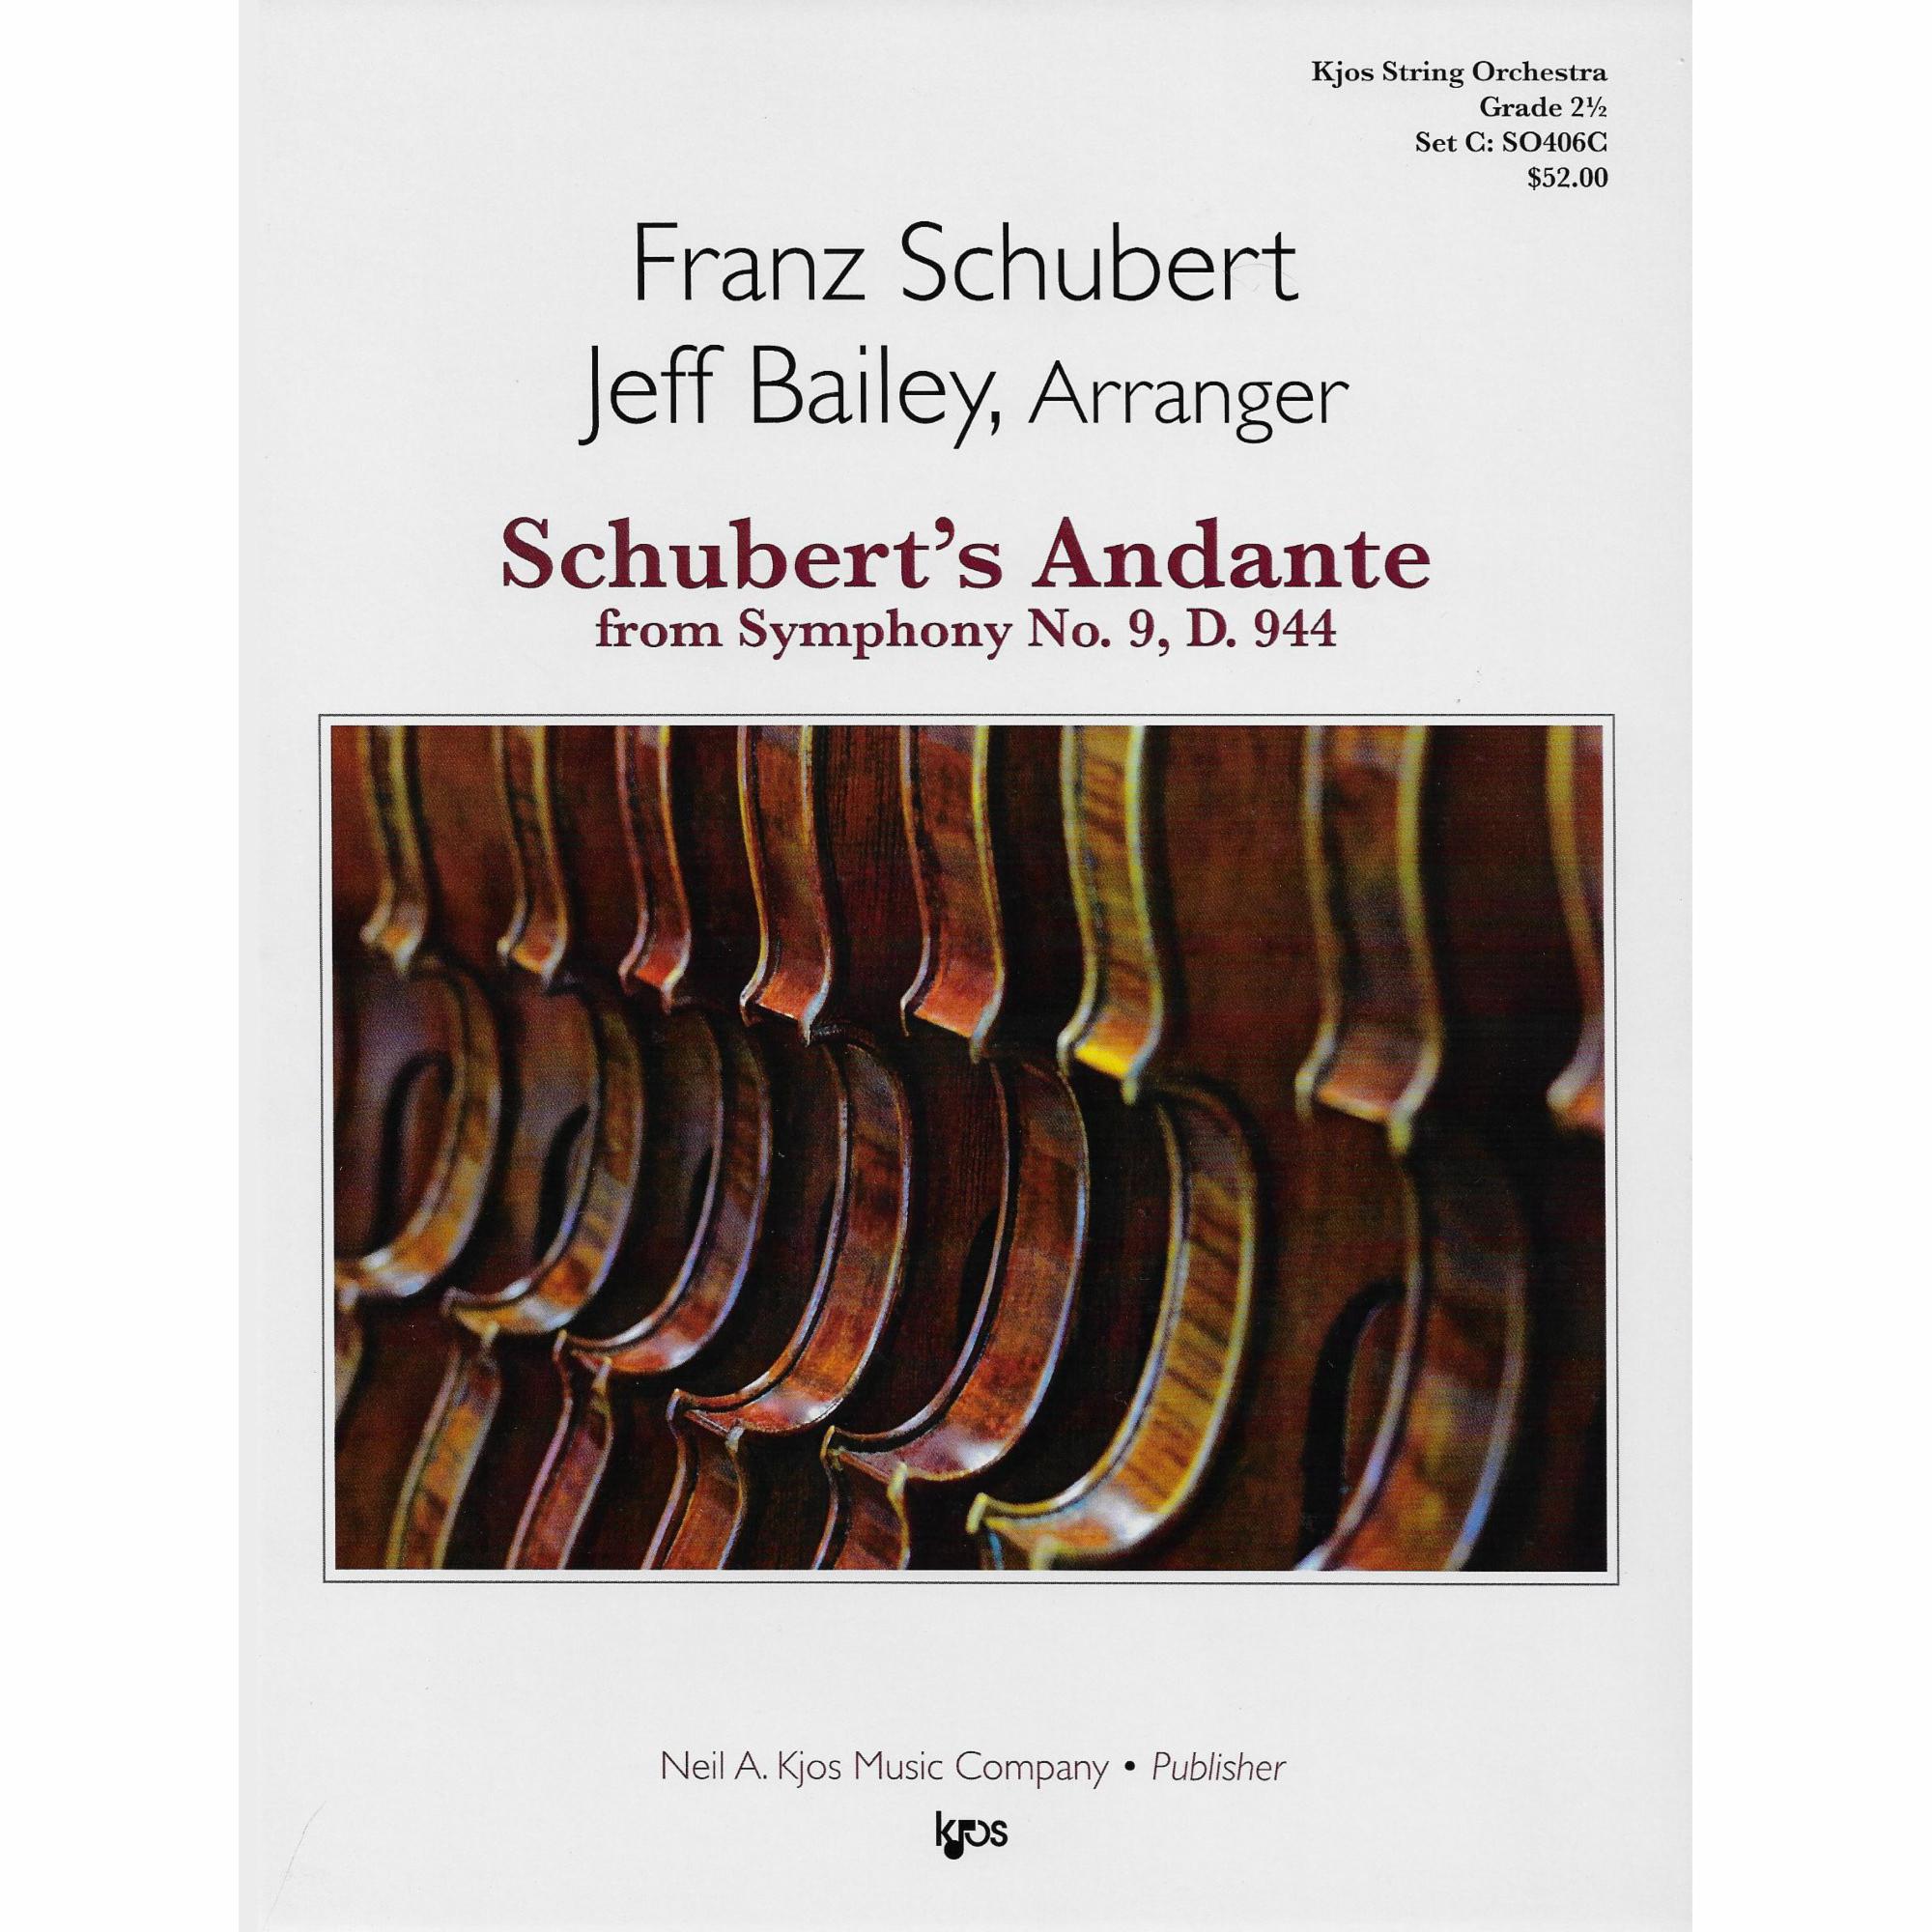 Schubert's Andante for String Orchestra